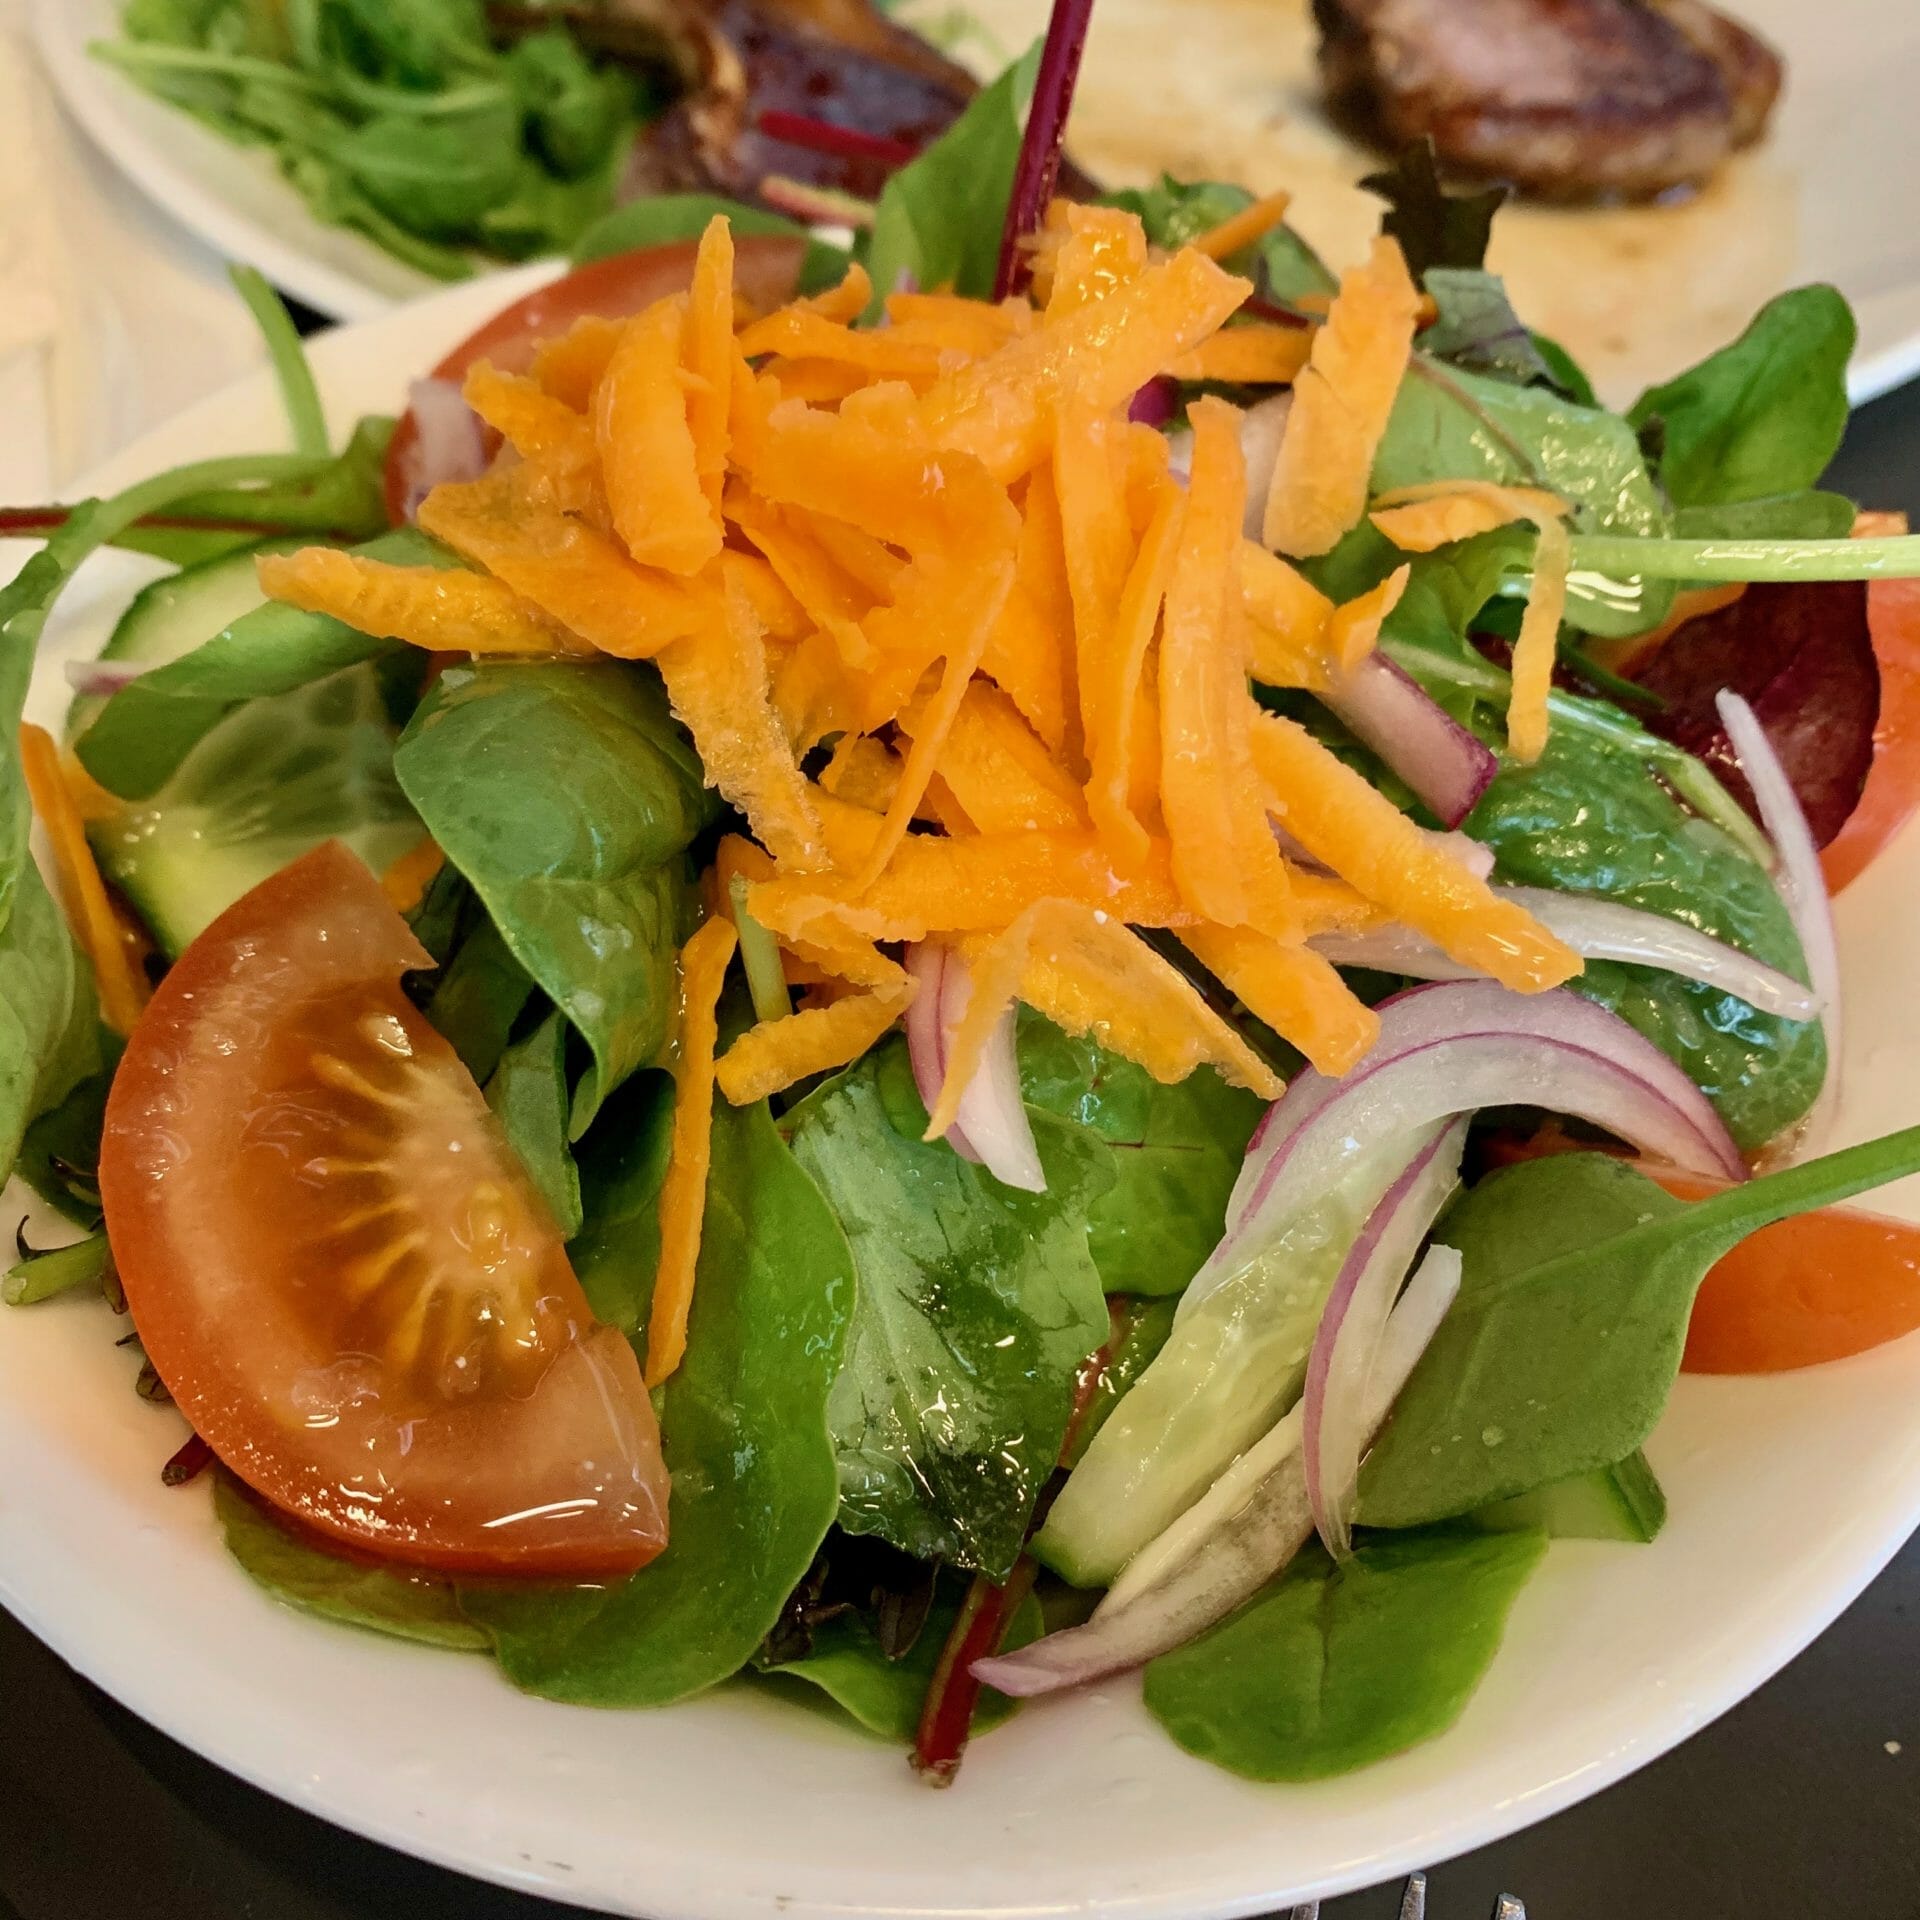 Mixed green salad with carrots, tomatoes, lettuce, cucumbers and onions